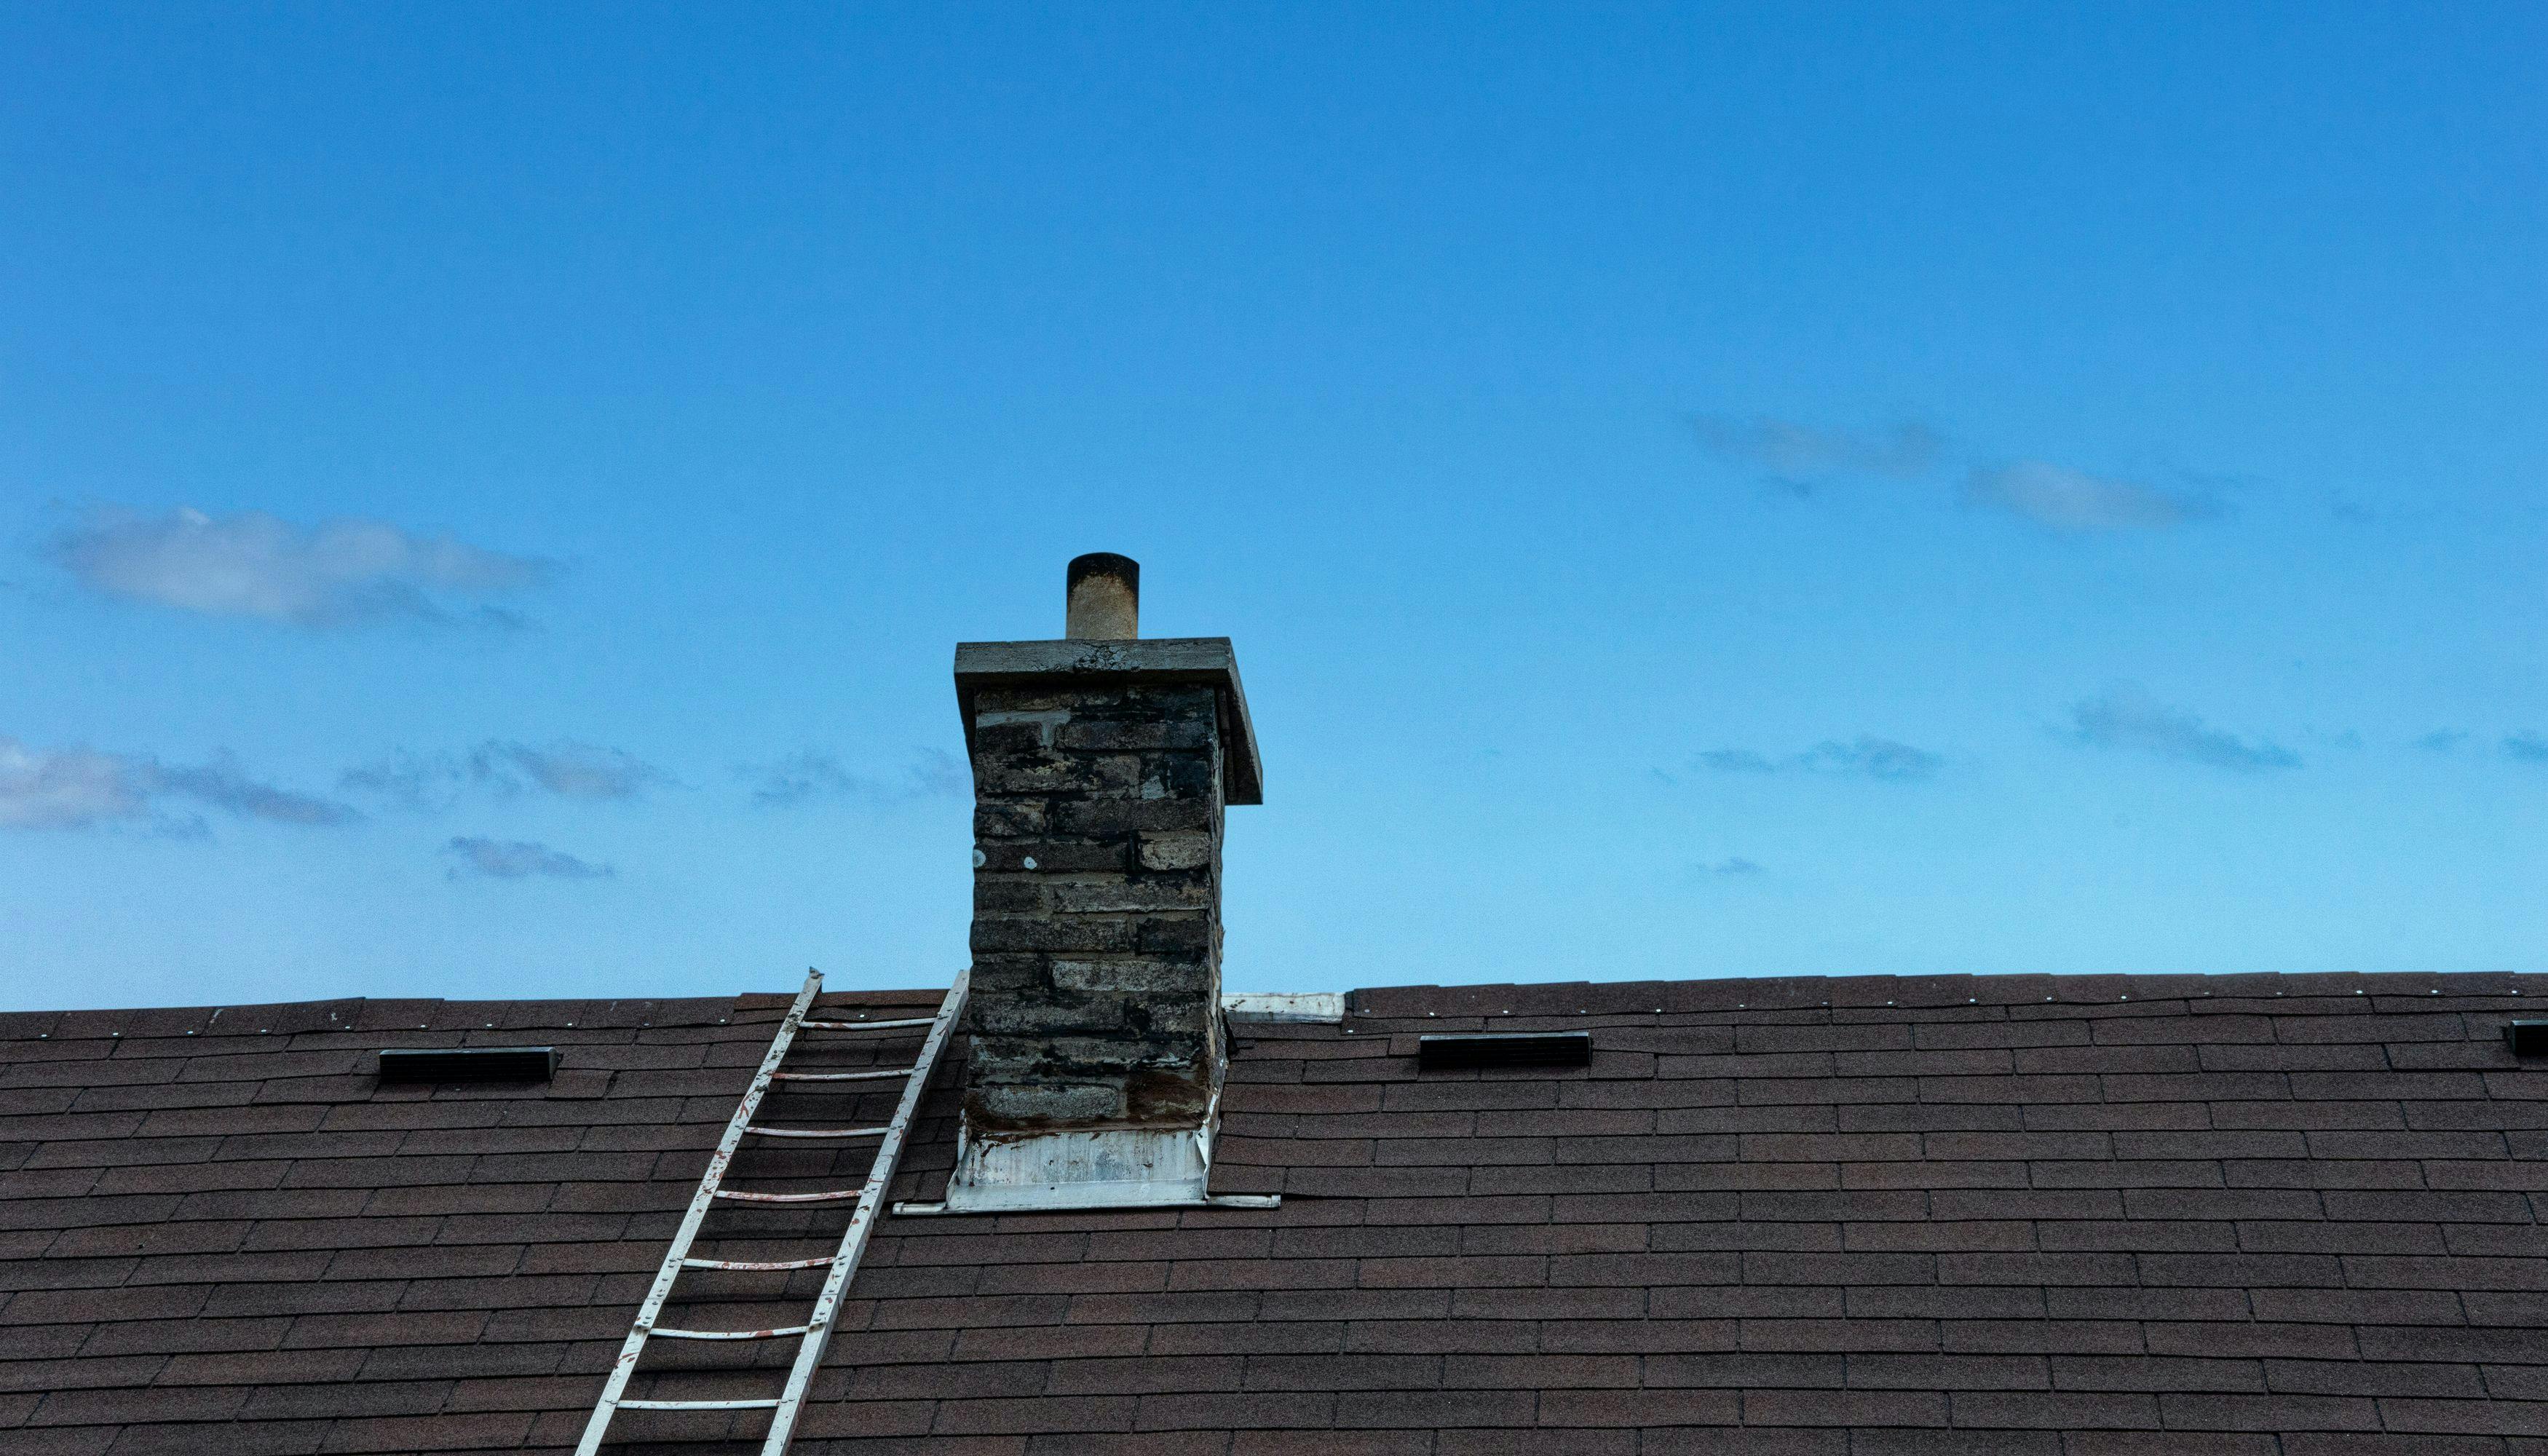 A ladder placed on a roof with a chimney for roof inspection purposes.